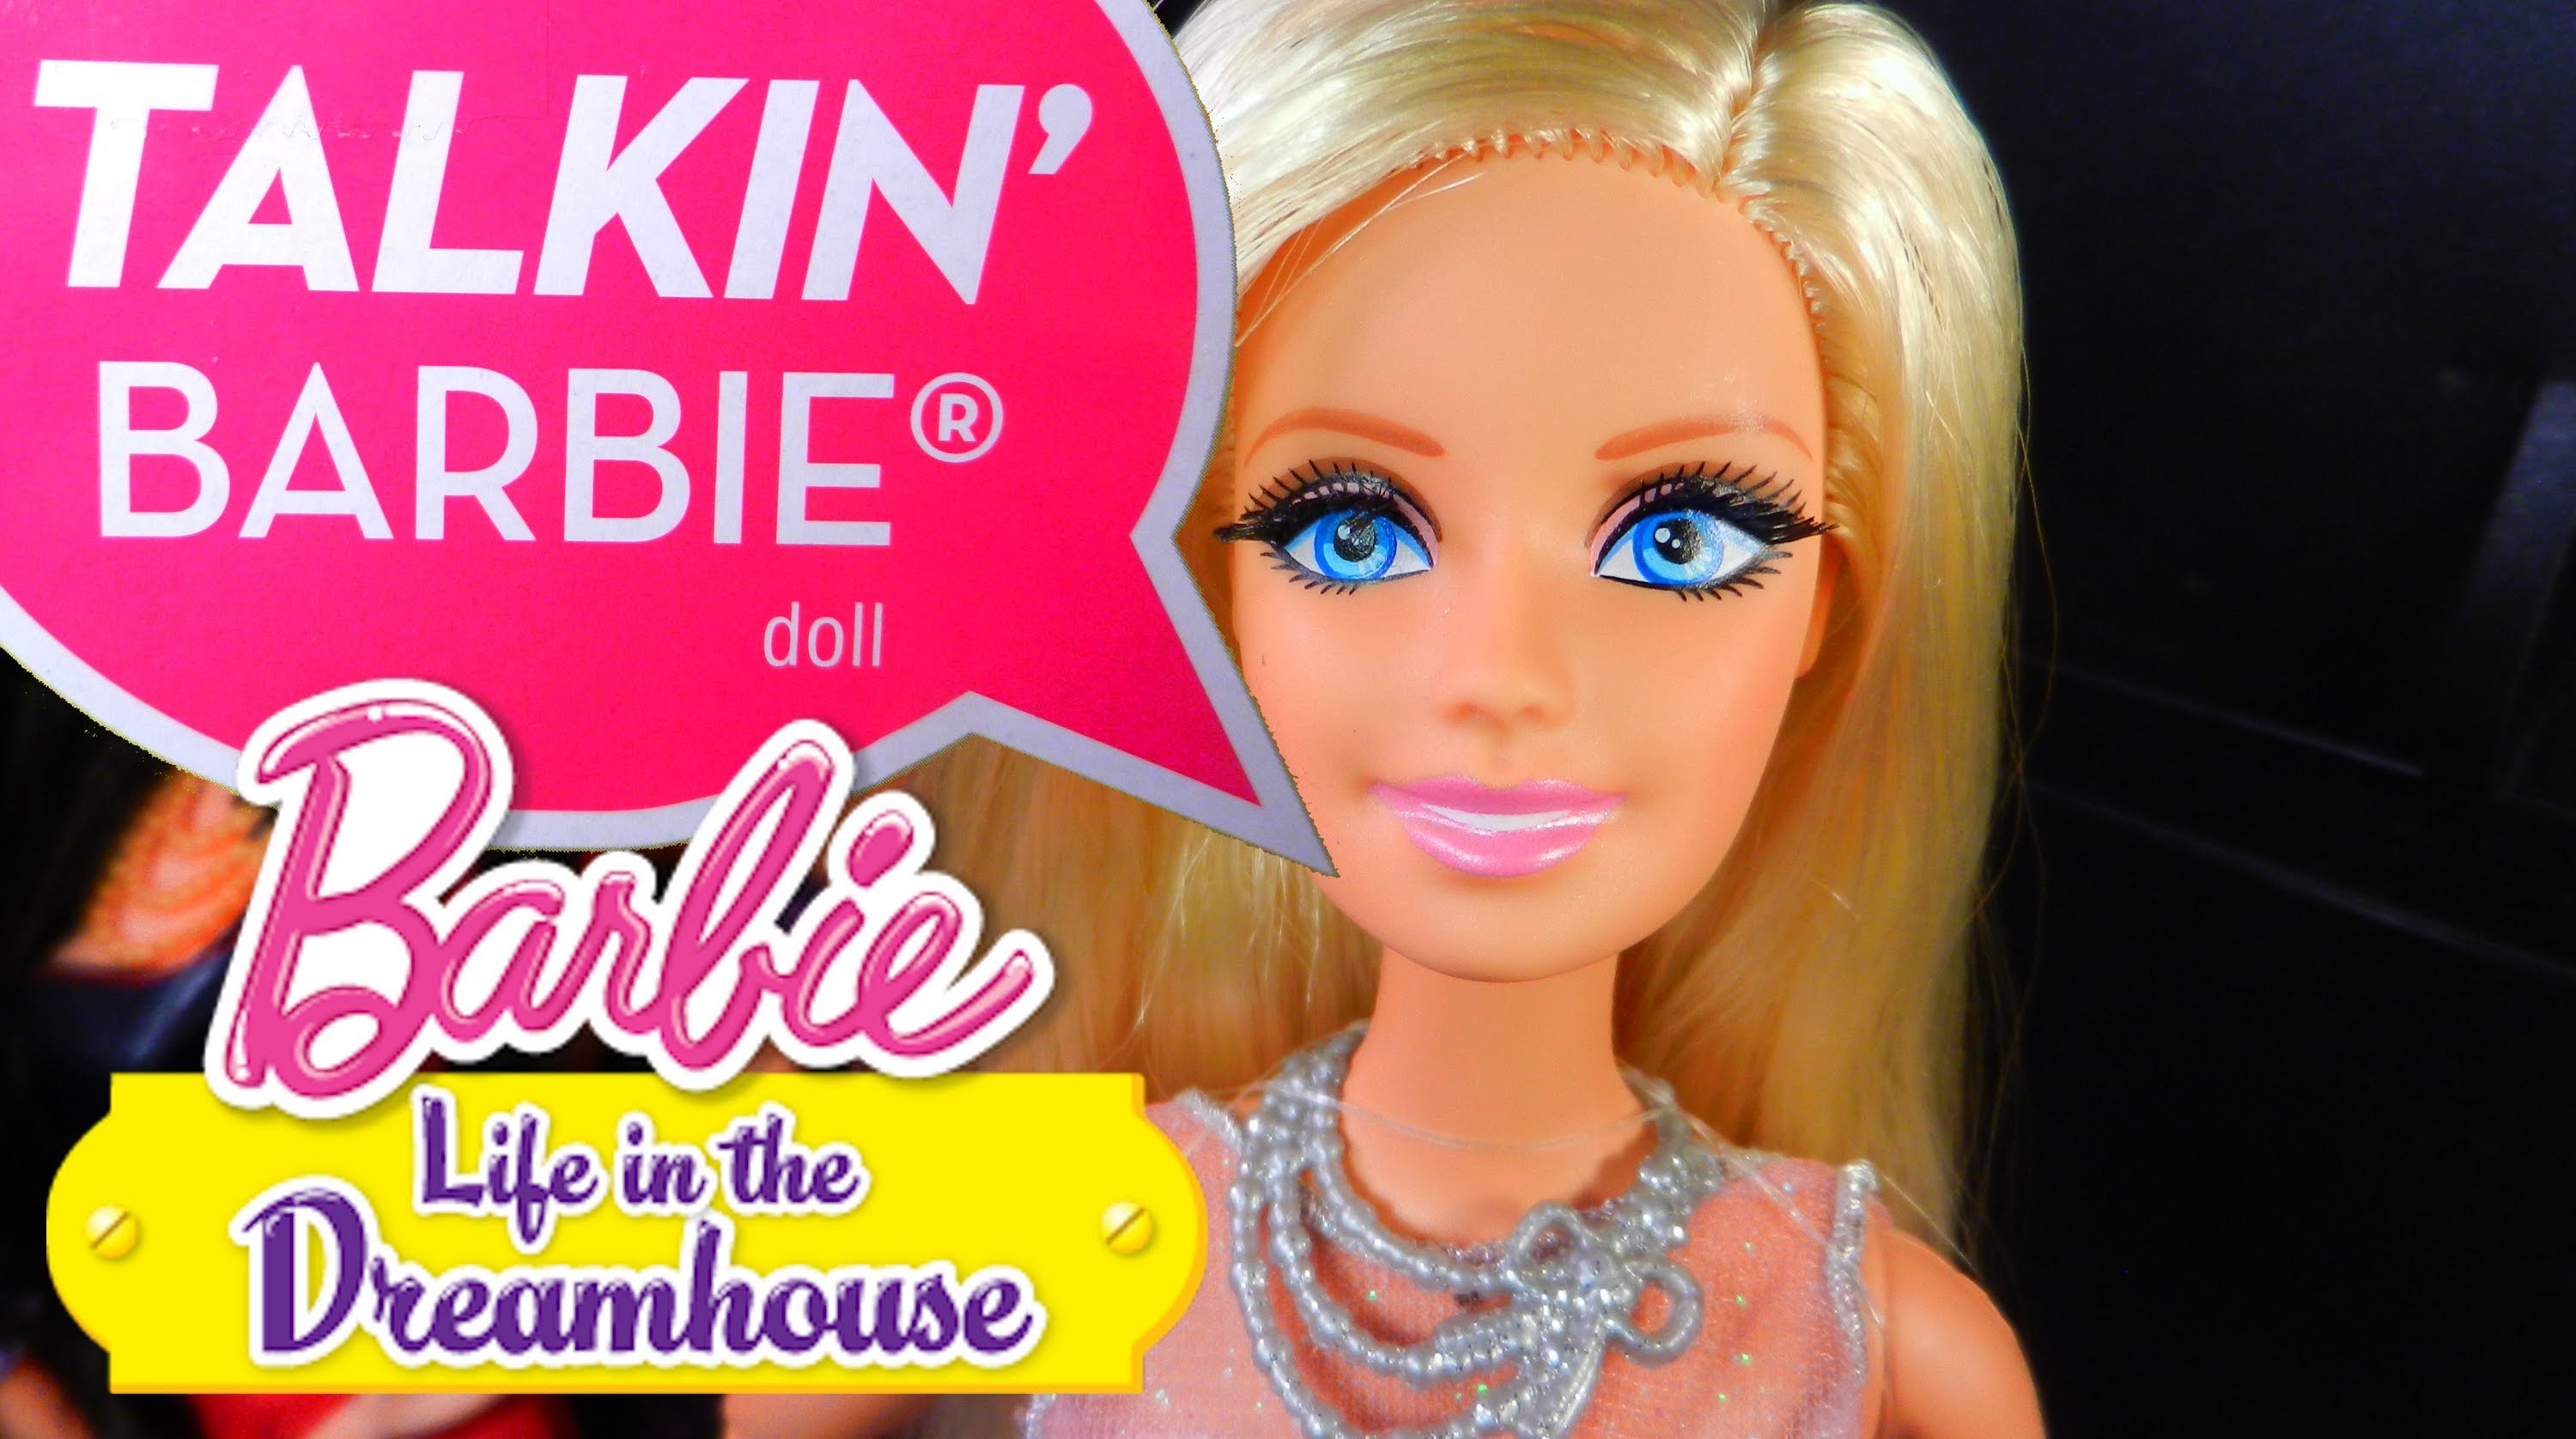 40 year old barbie